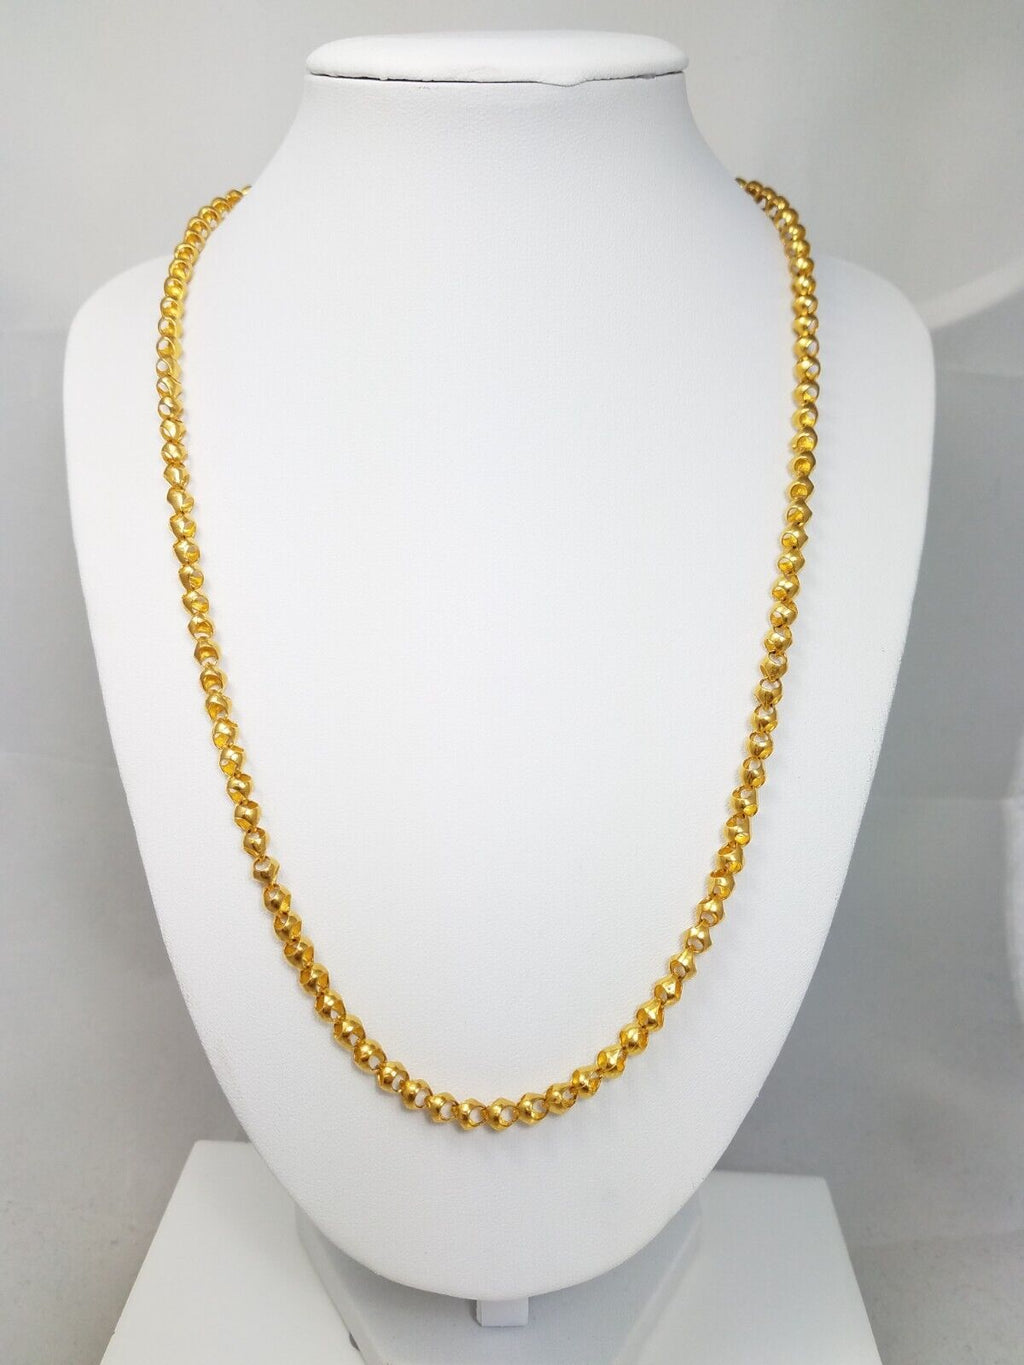 21" 24k Solid Yellow Gold Fancy Link Chain Necklace